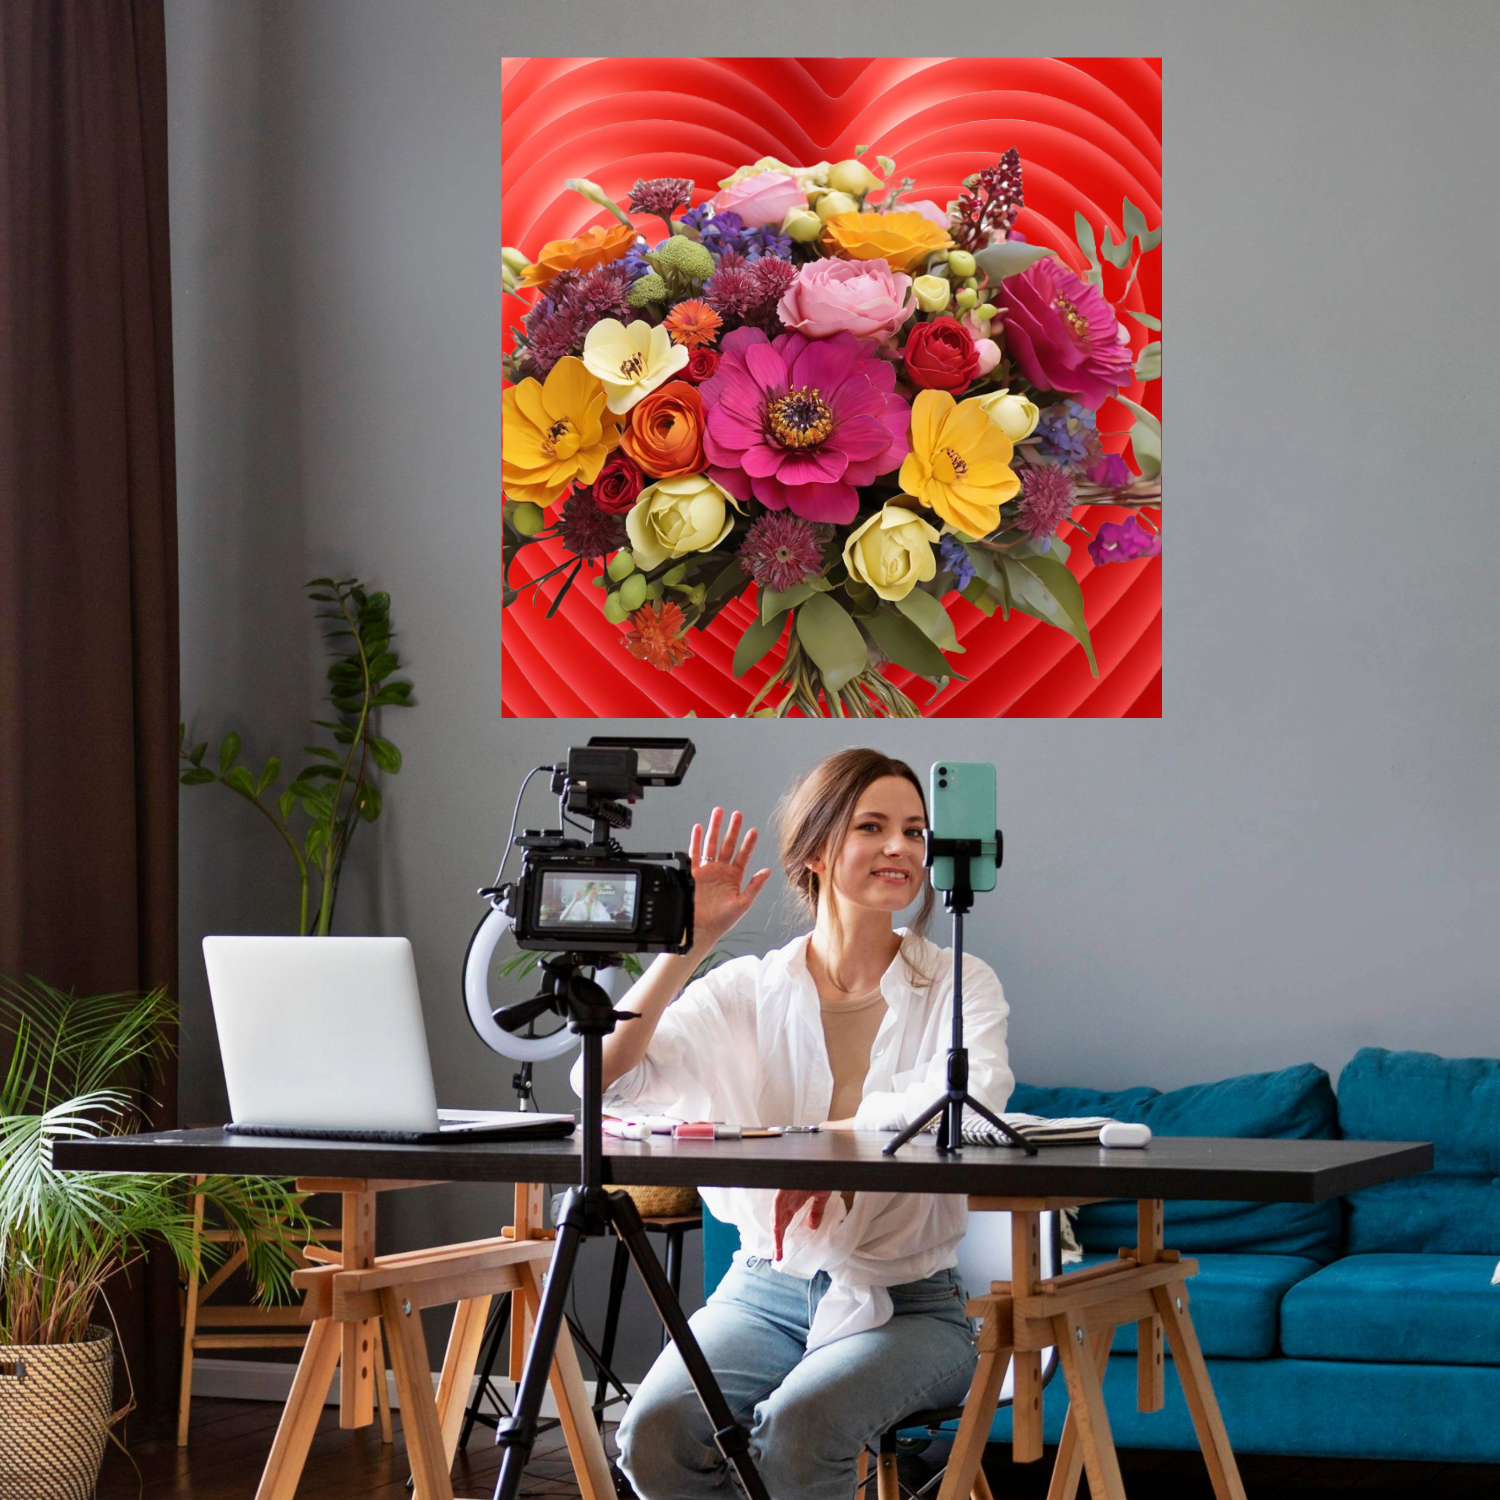 Wall Art LOVE FLOWERS Canvas Print Painting Original Giclee 32X32 GW Love Nice Beauty Fun Design Fit Hot House Home Office Gift Ready Hang Living